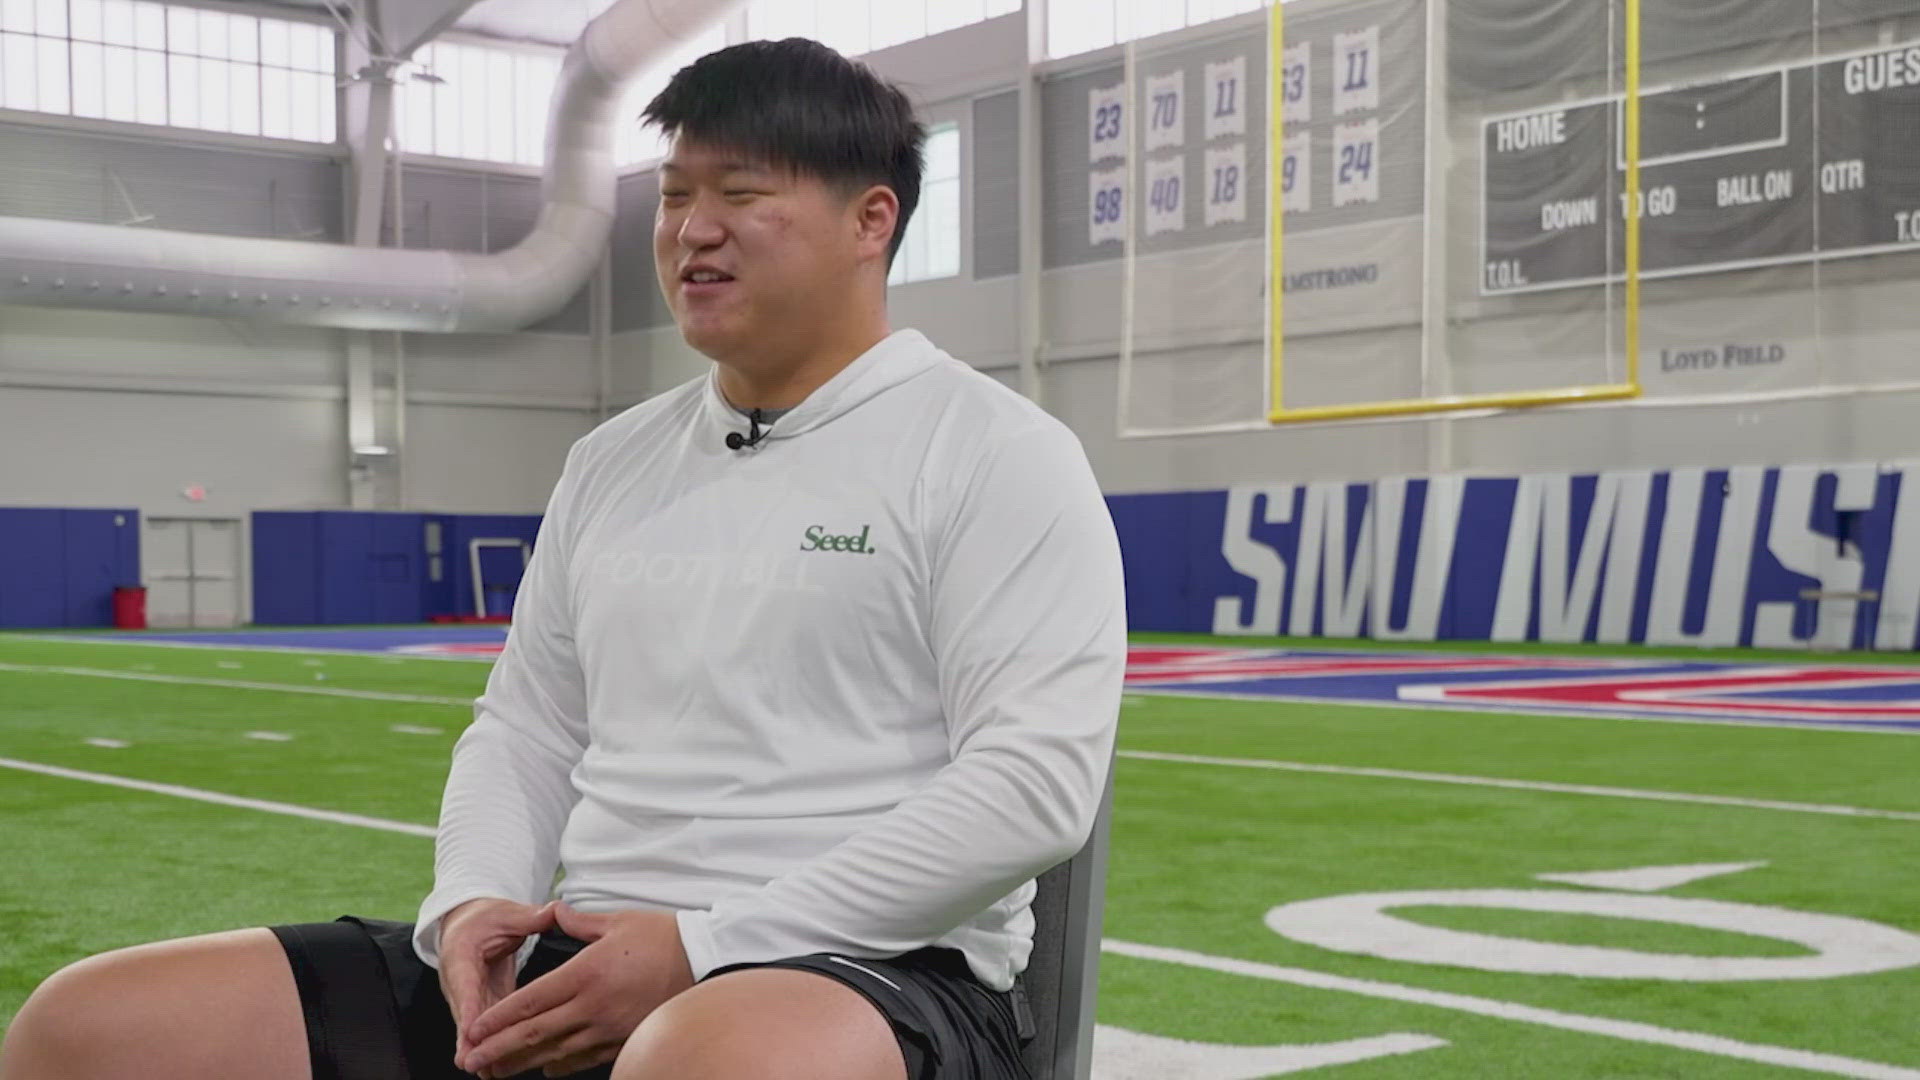 From China, Max Yao moved to Dallas to study at SMU. His classmates suggested he try out for the football team. With zero experience, he made the roster.